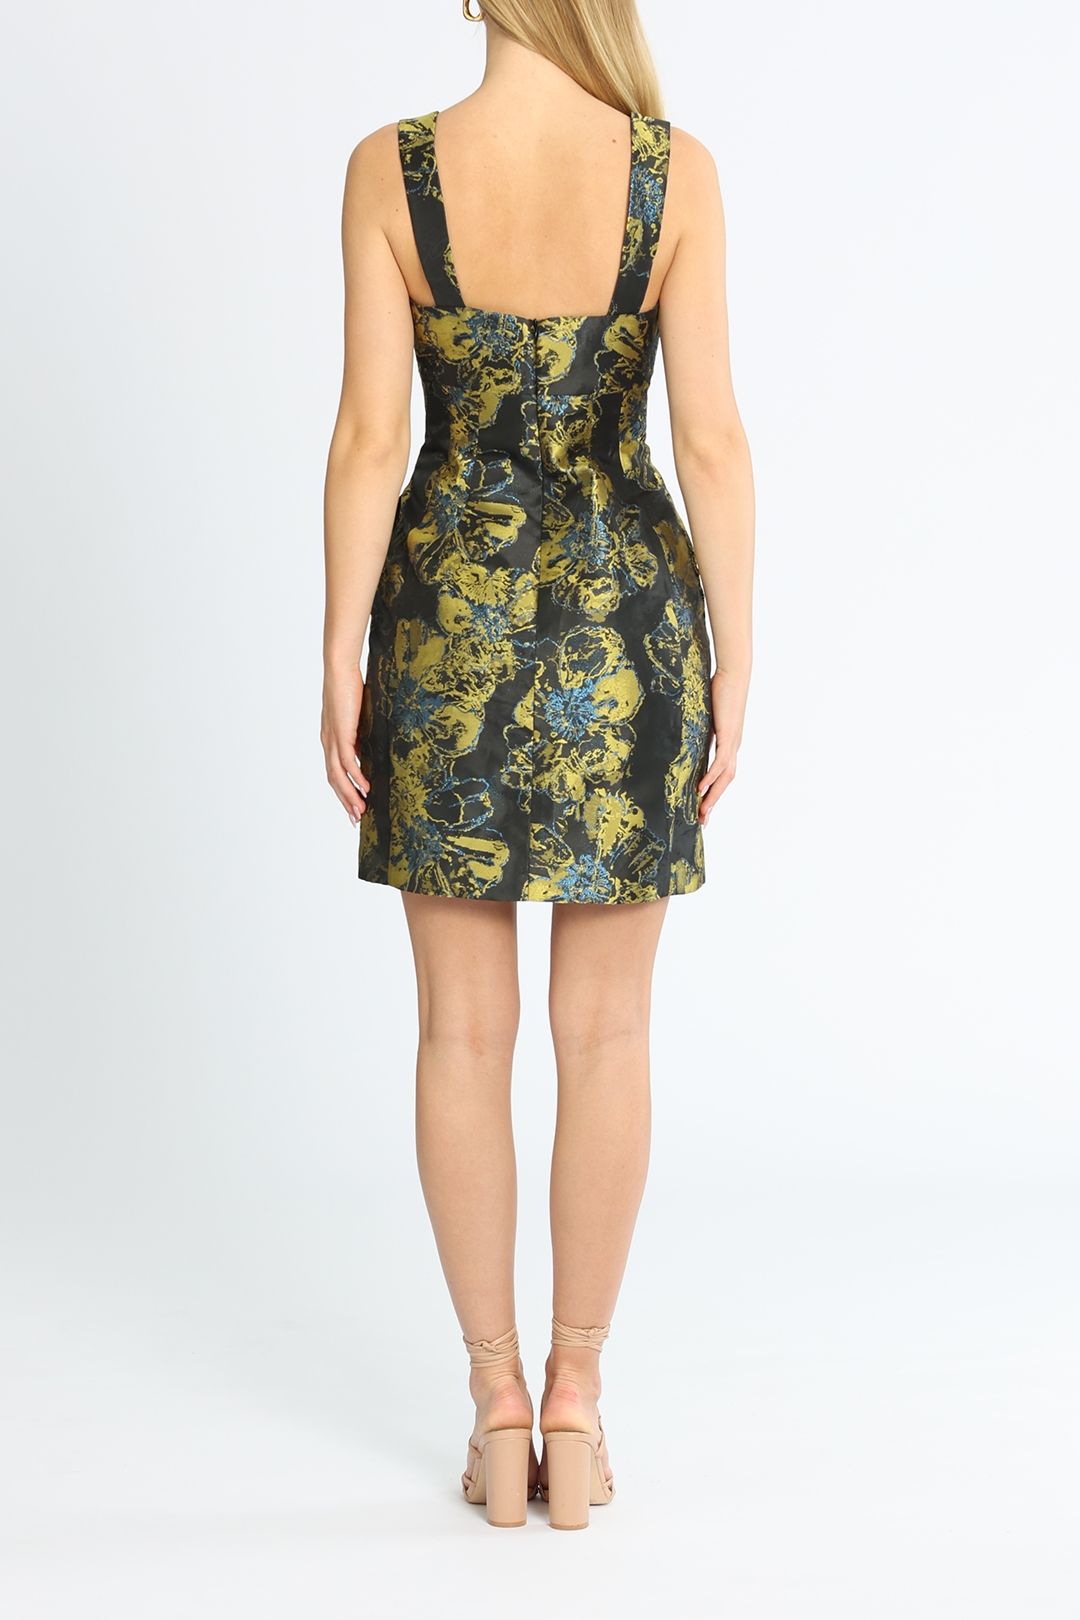 Cue Sketched Floral Jacquard Mini Dress Black and Gold